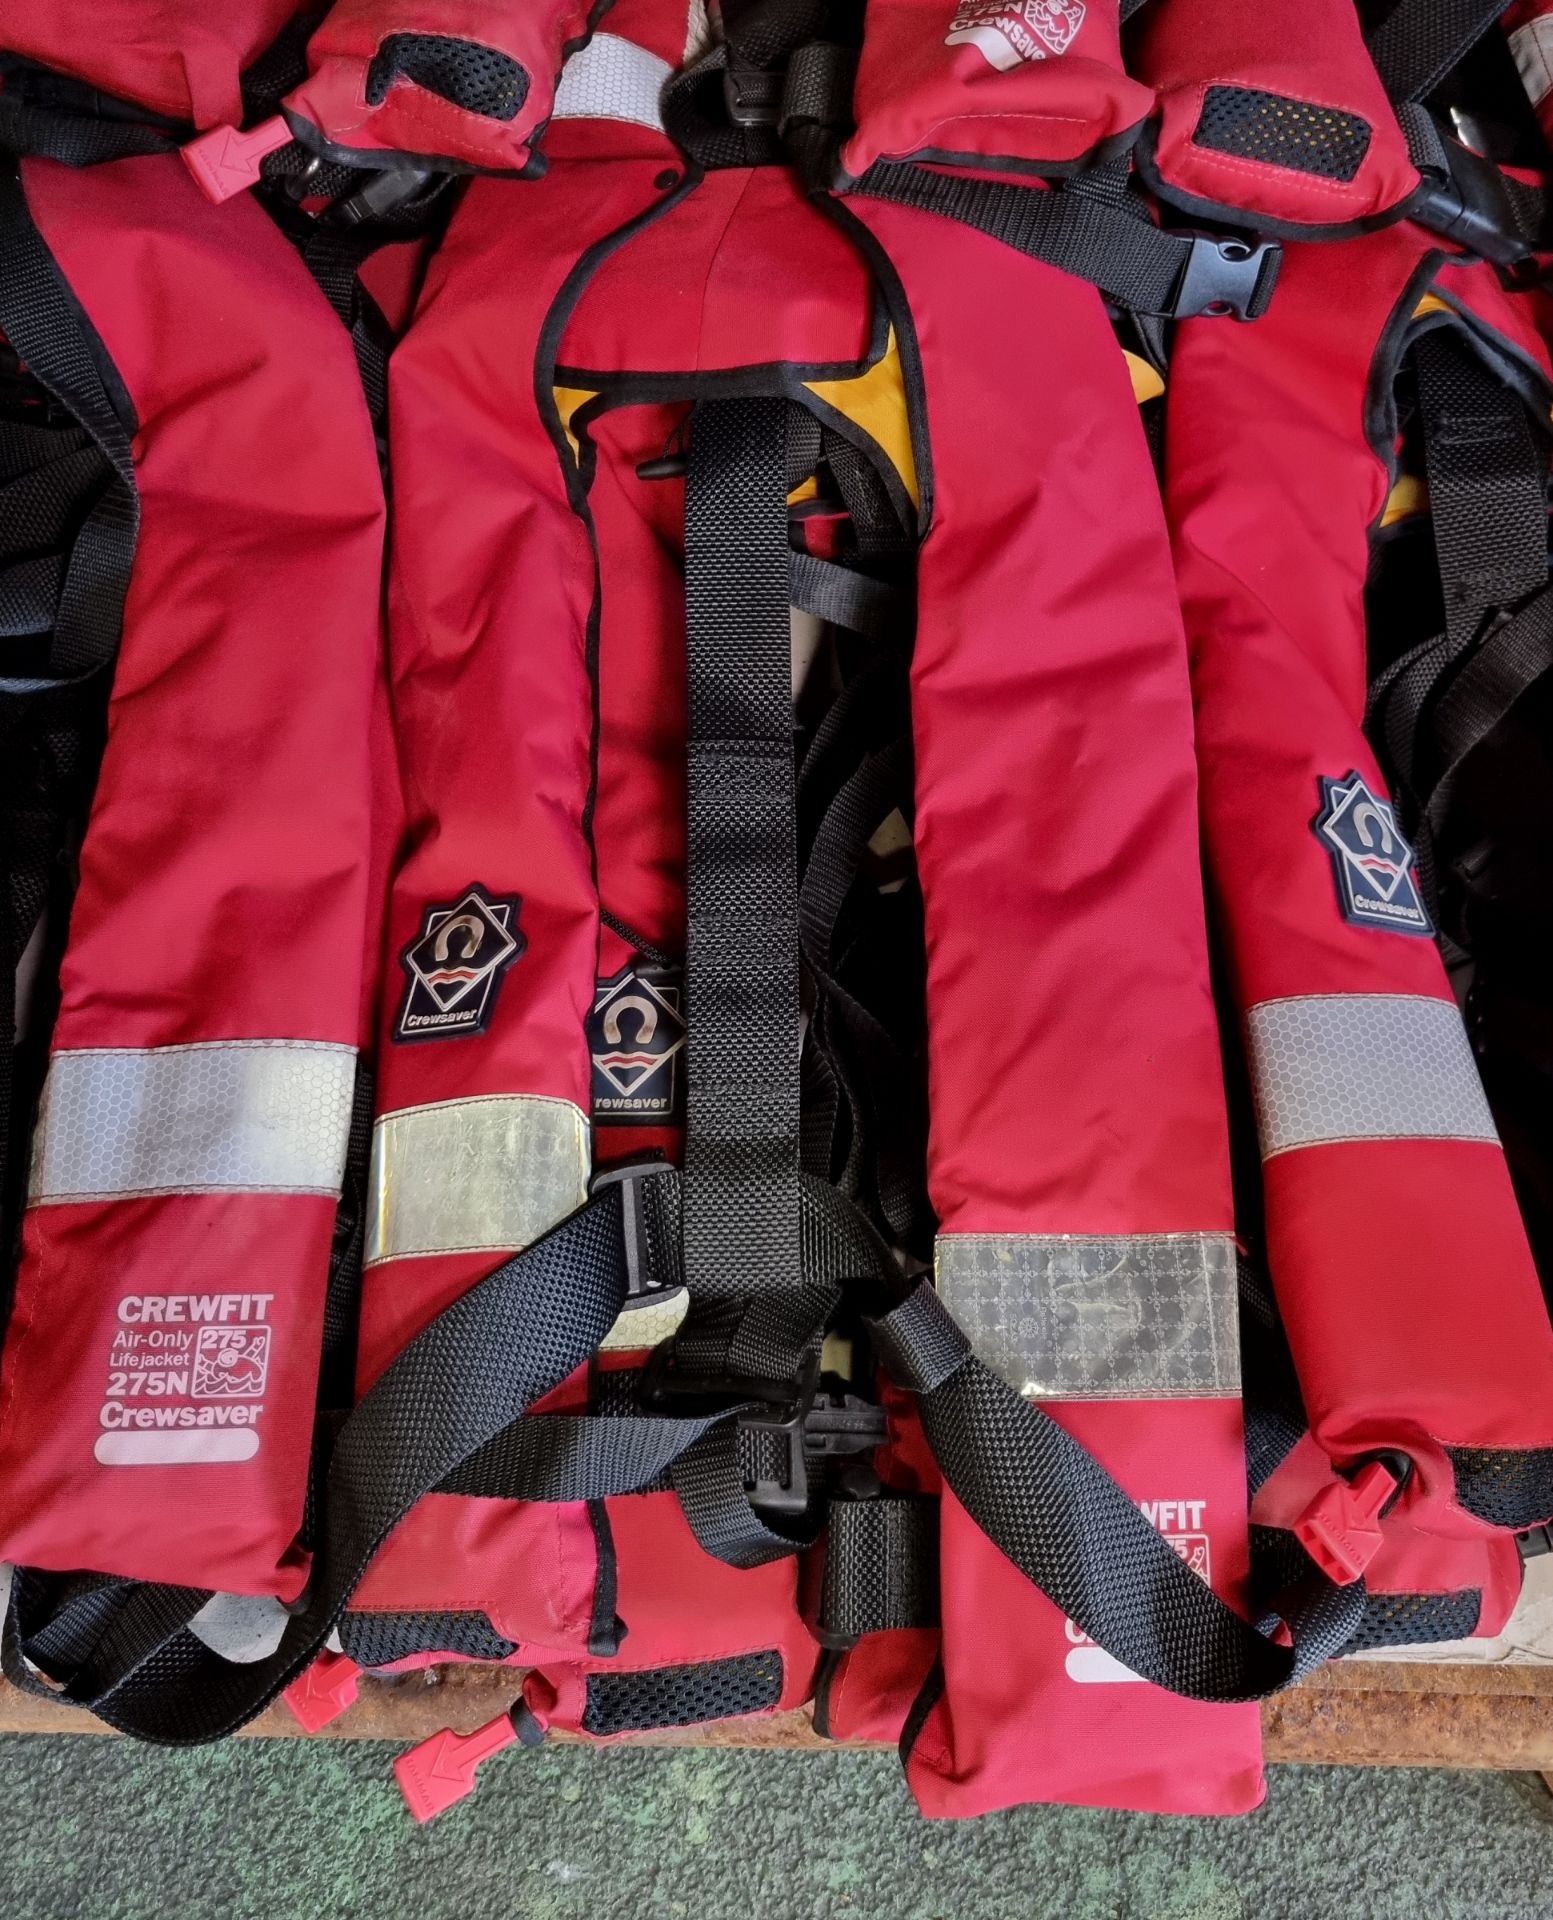 20x Crewfit 275N Crewsaver air-only lifejackets - CO2 CARTRIDGES OUT OF DATE - UNCERTIFIED - Image 3 of 3